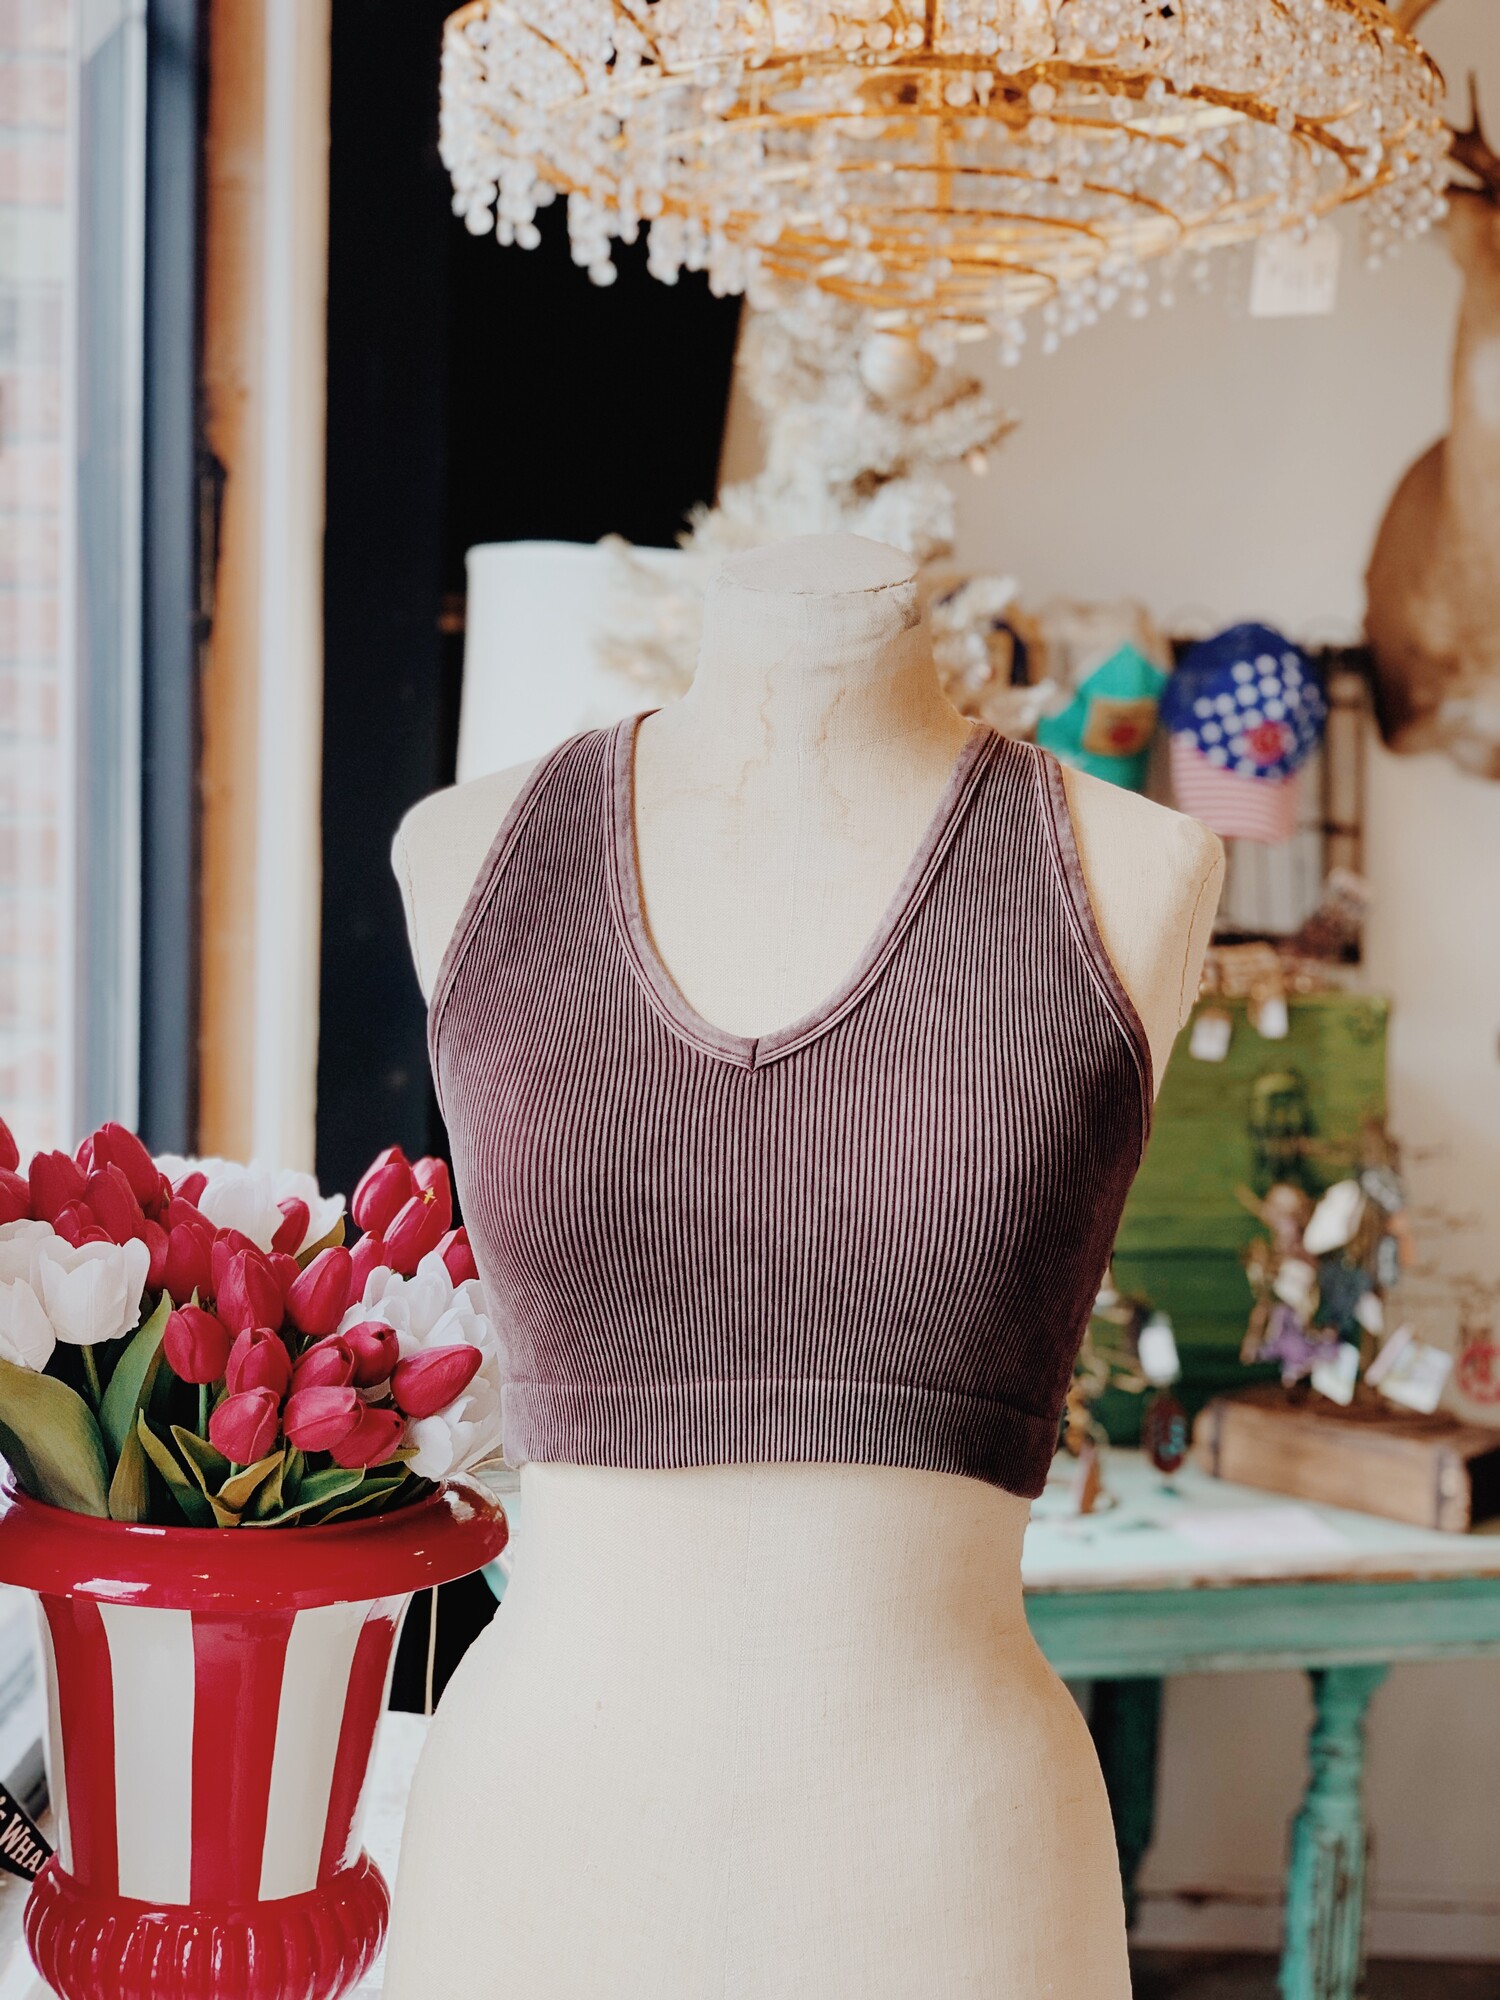 These adorable bralettes are made of a stretchy, breathable fabric! The V neck shape of these make them perfect for layering! Or, wear it on its own as a cami crop top! With endless uses, these bralettes are a closet staple!